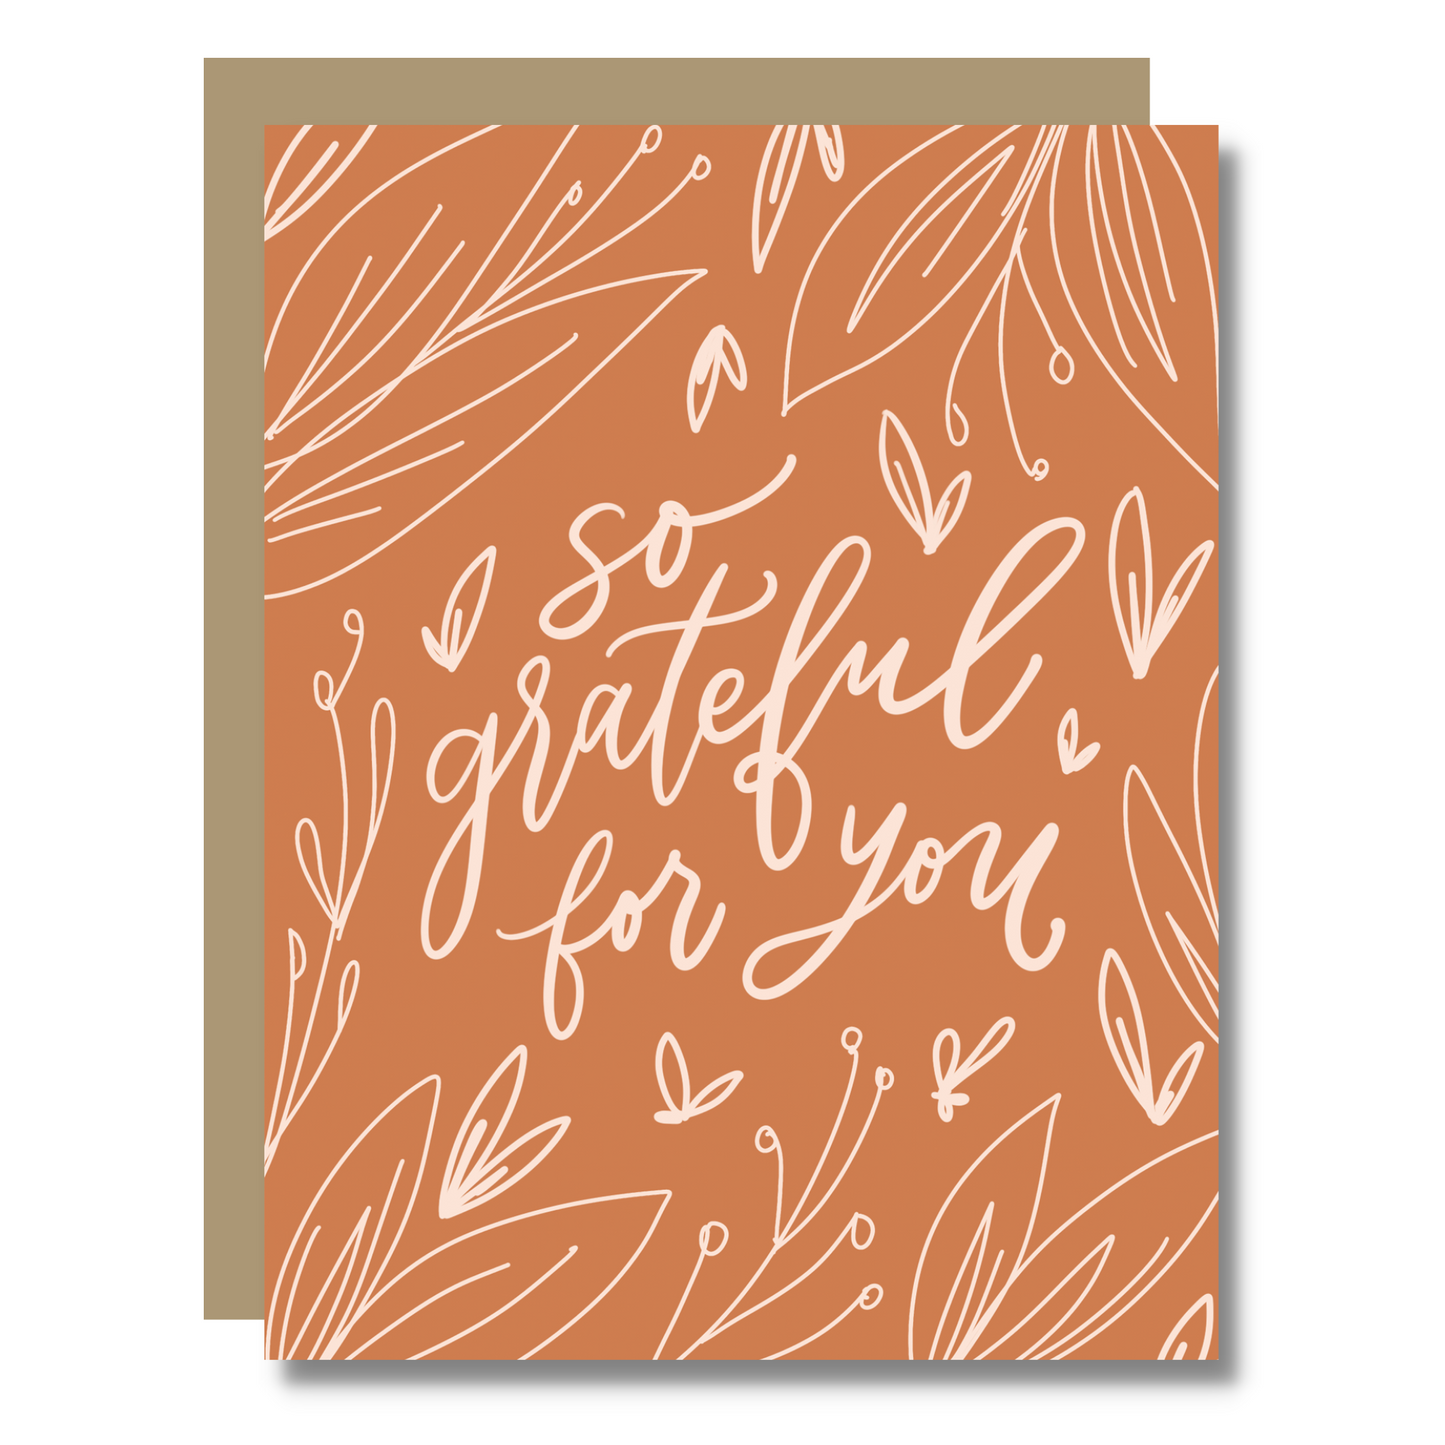 So Grateful for You Card